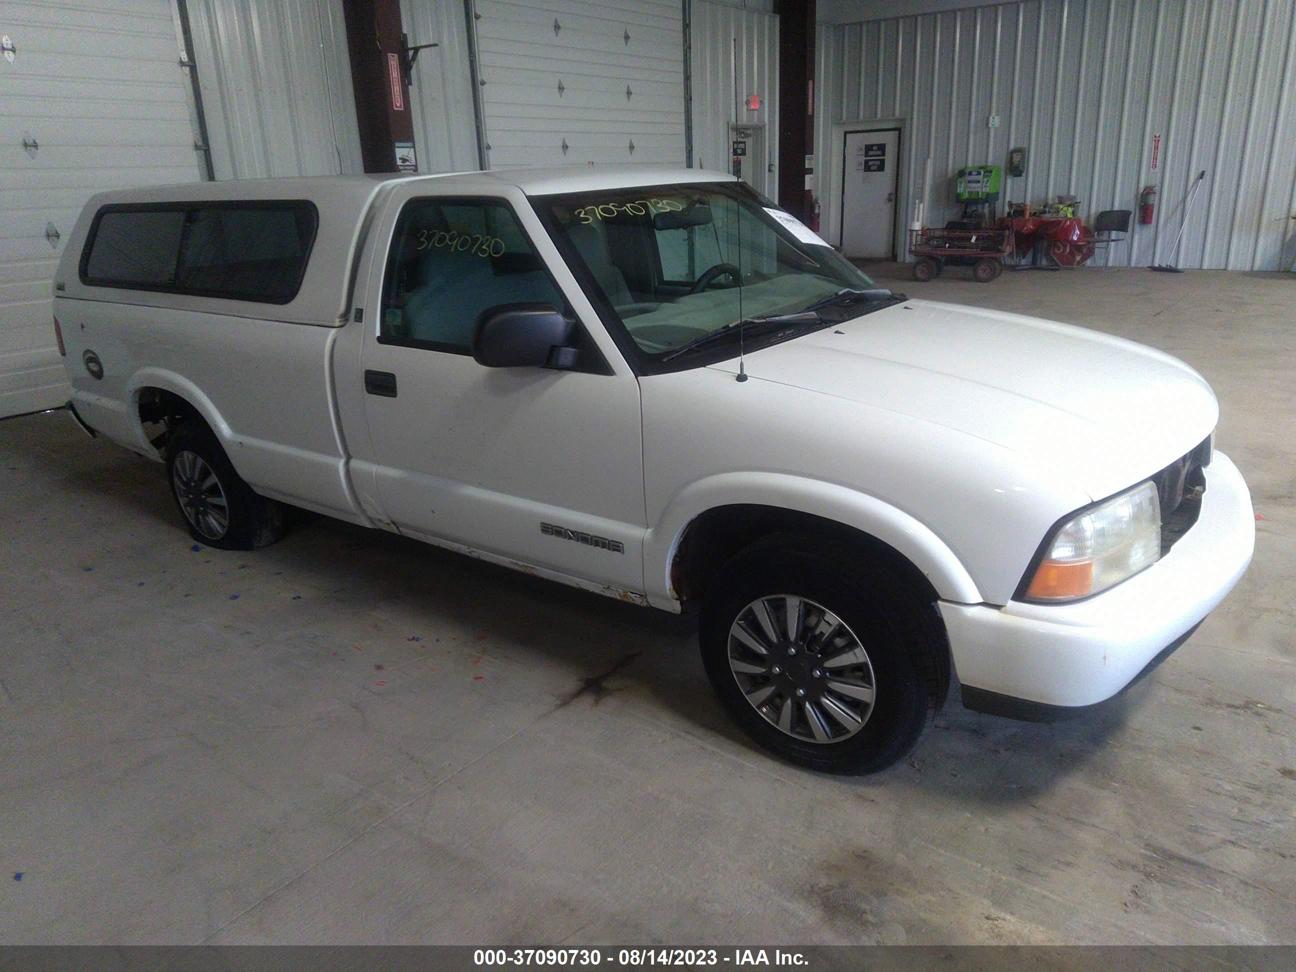 vin: 1GTCS1440WK525793 1GTCS1440WK525793 1998 gmc sonoma 4300 for Sale in 14416, 7149 Appletree Ave., Bergen, New York, USA